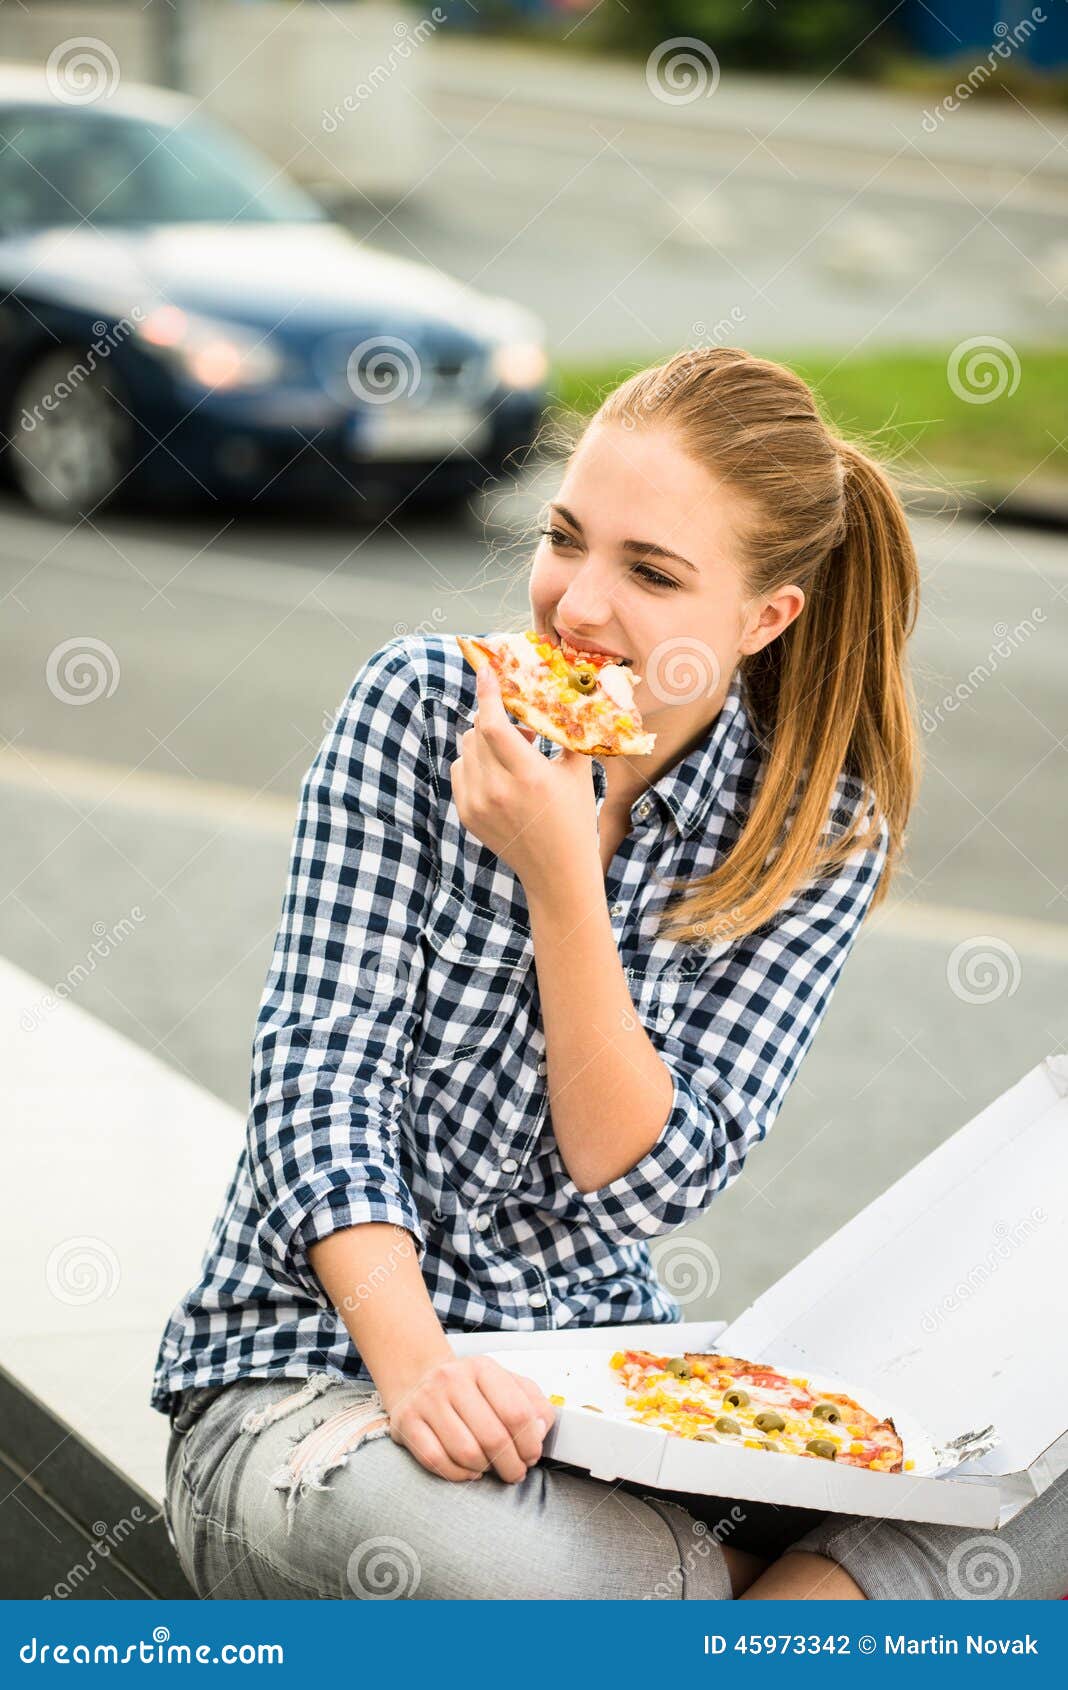 Teenager Eating Pizza In Street Sto